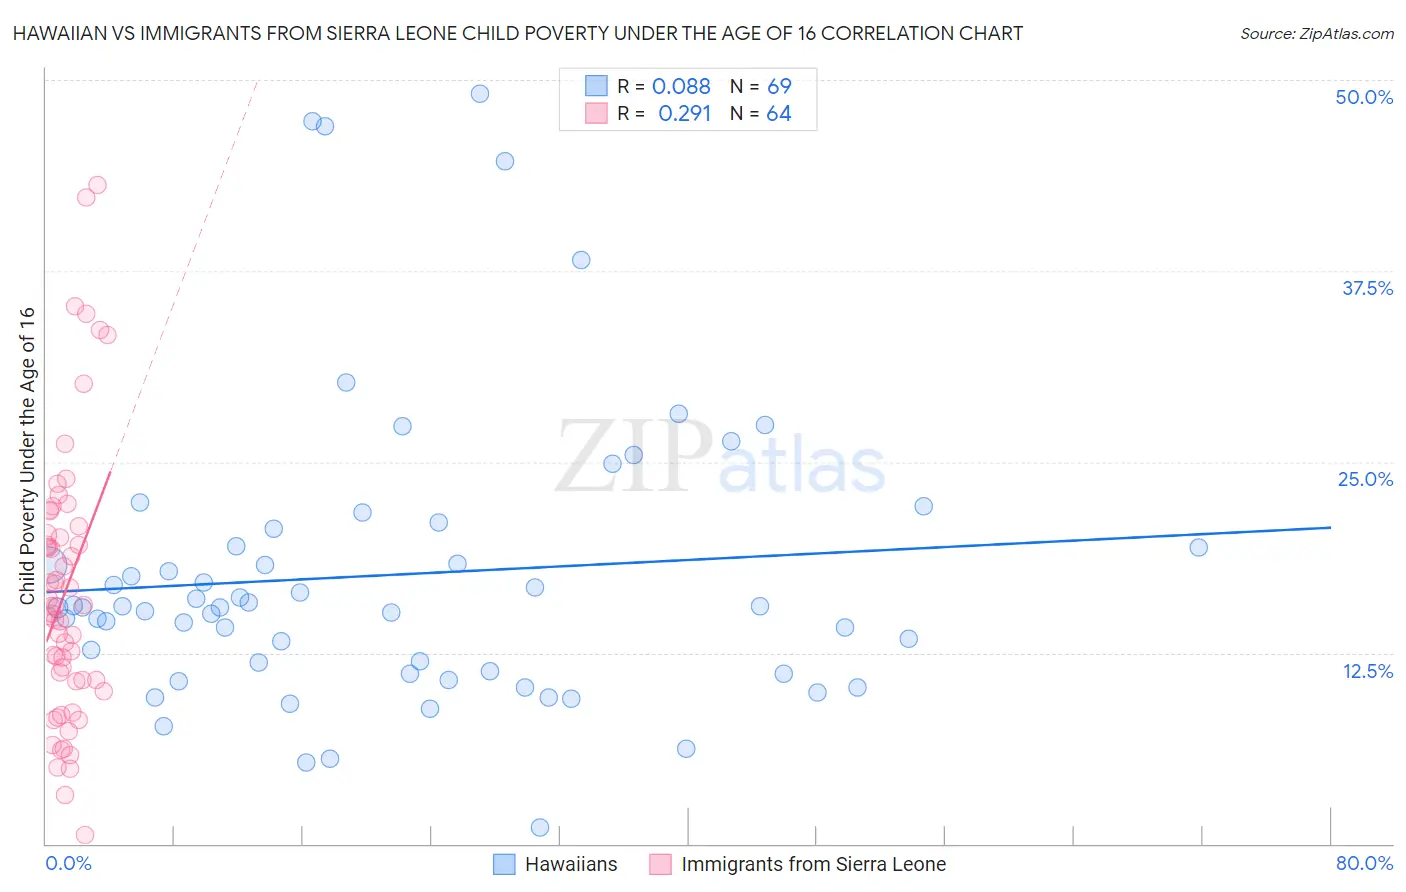 Hawaiian vs Immigrants from Sierra Leone Child Poverty Under the Age of 16